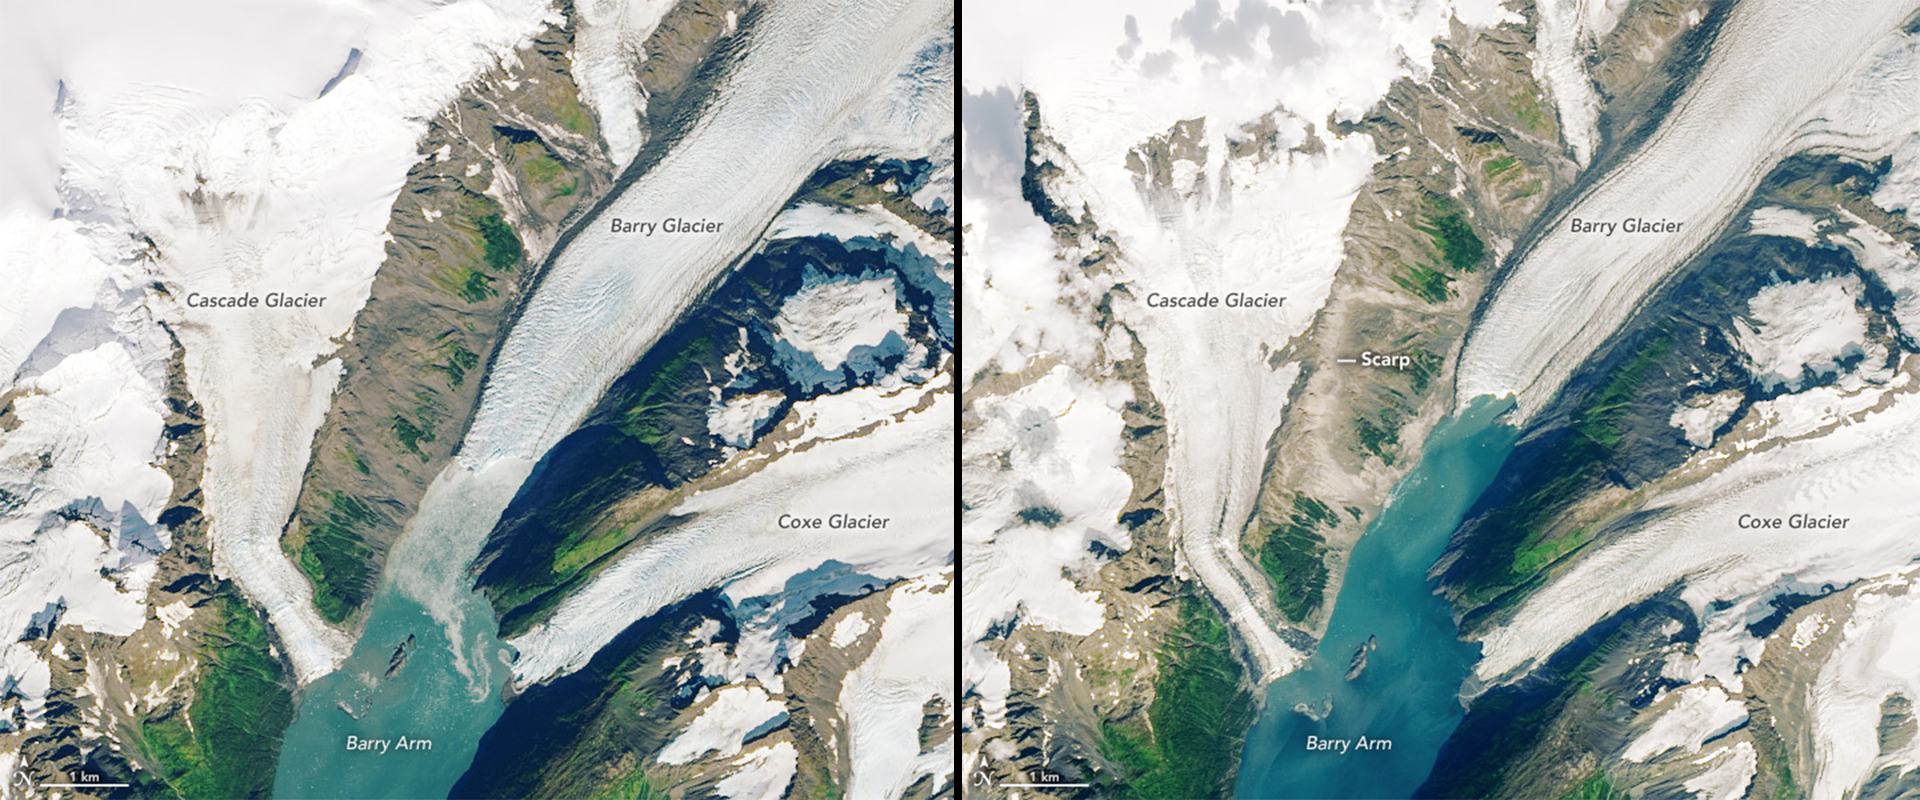 two side by side images of Cascade Glacier and Barry Arm glacier. The image on the left shows more white glacier and the image on the right shows less